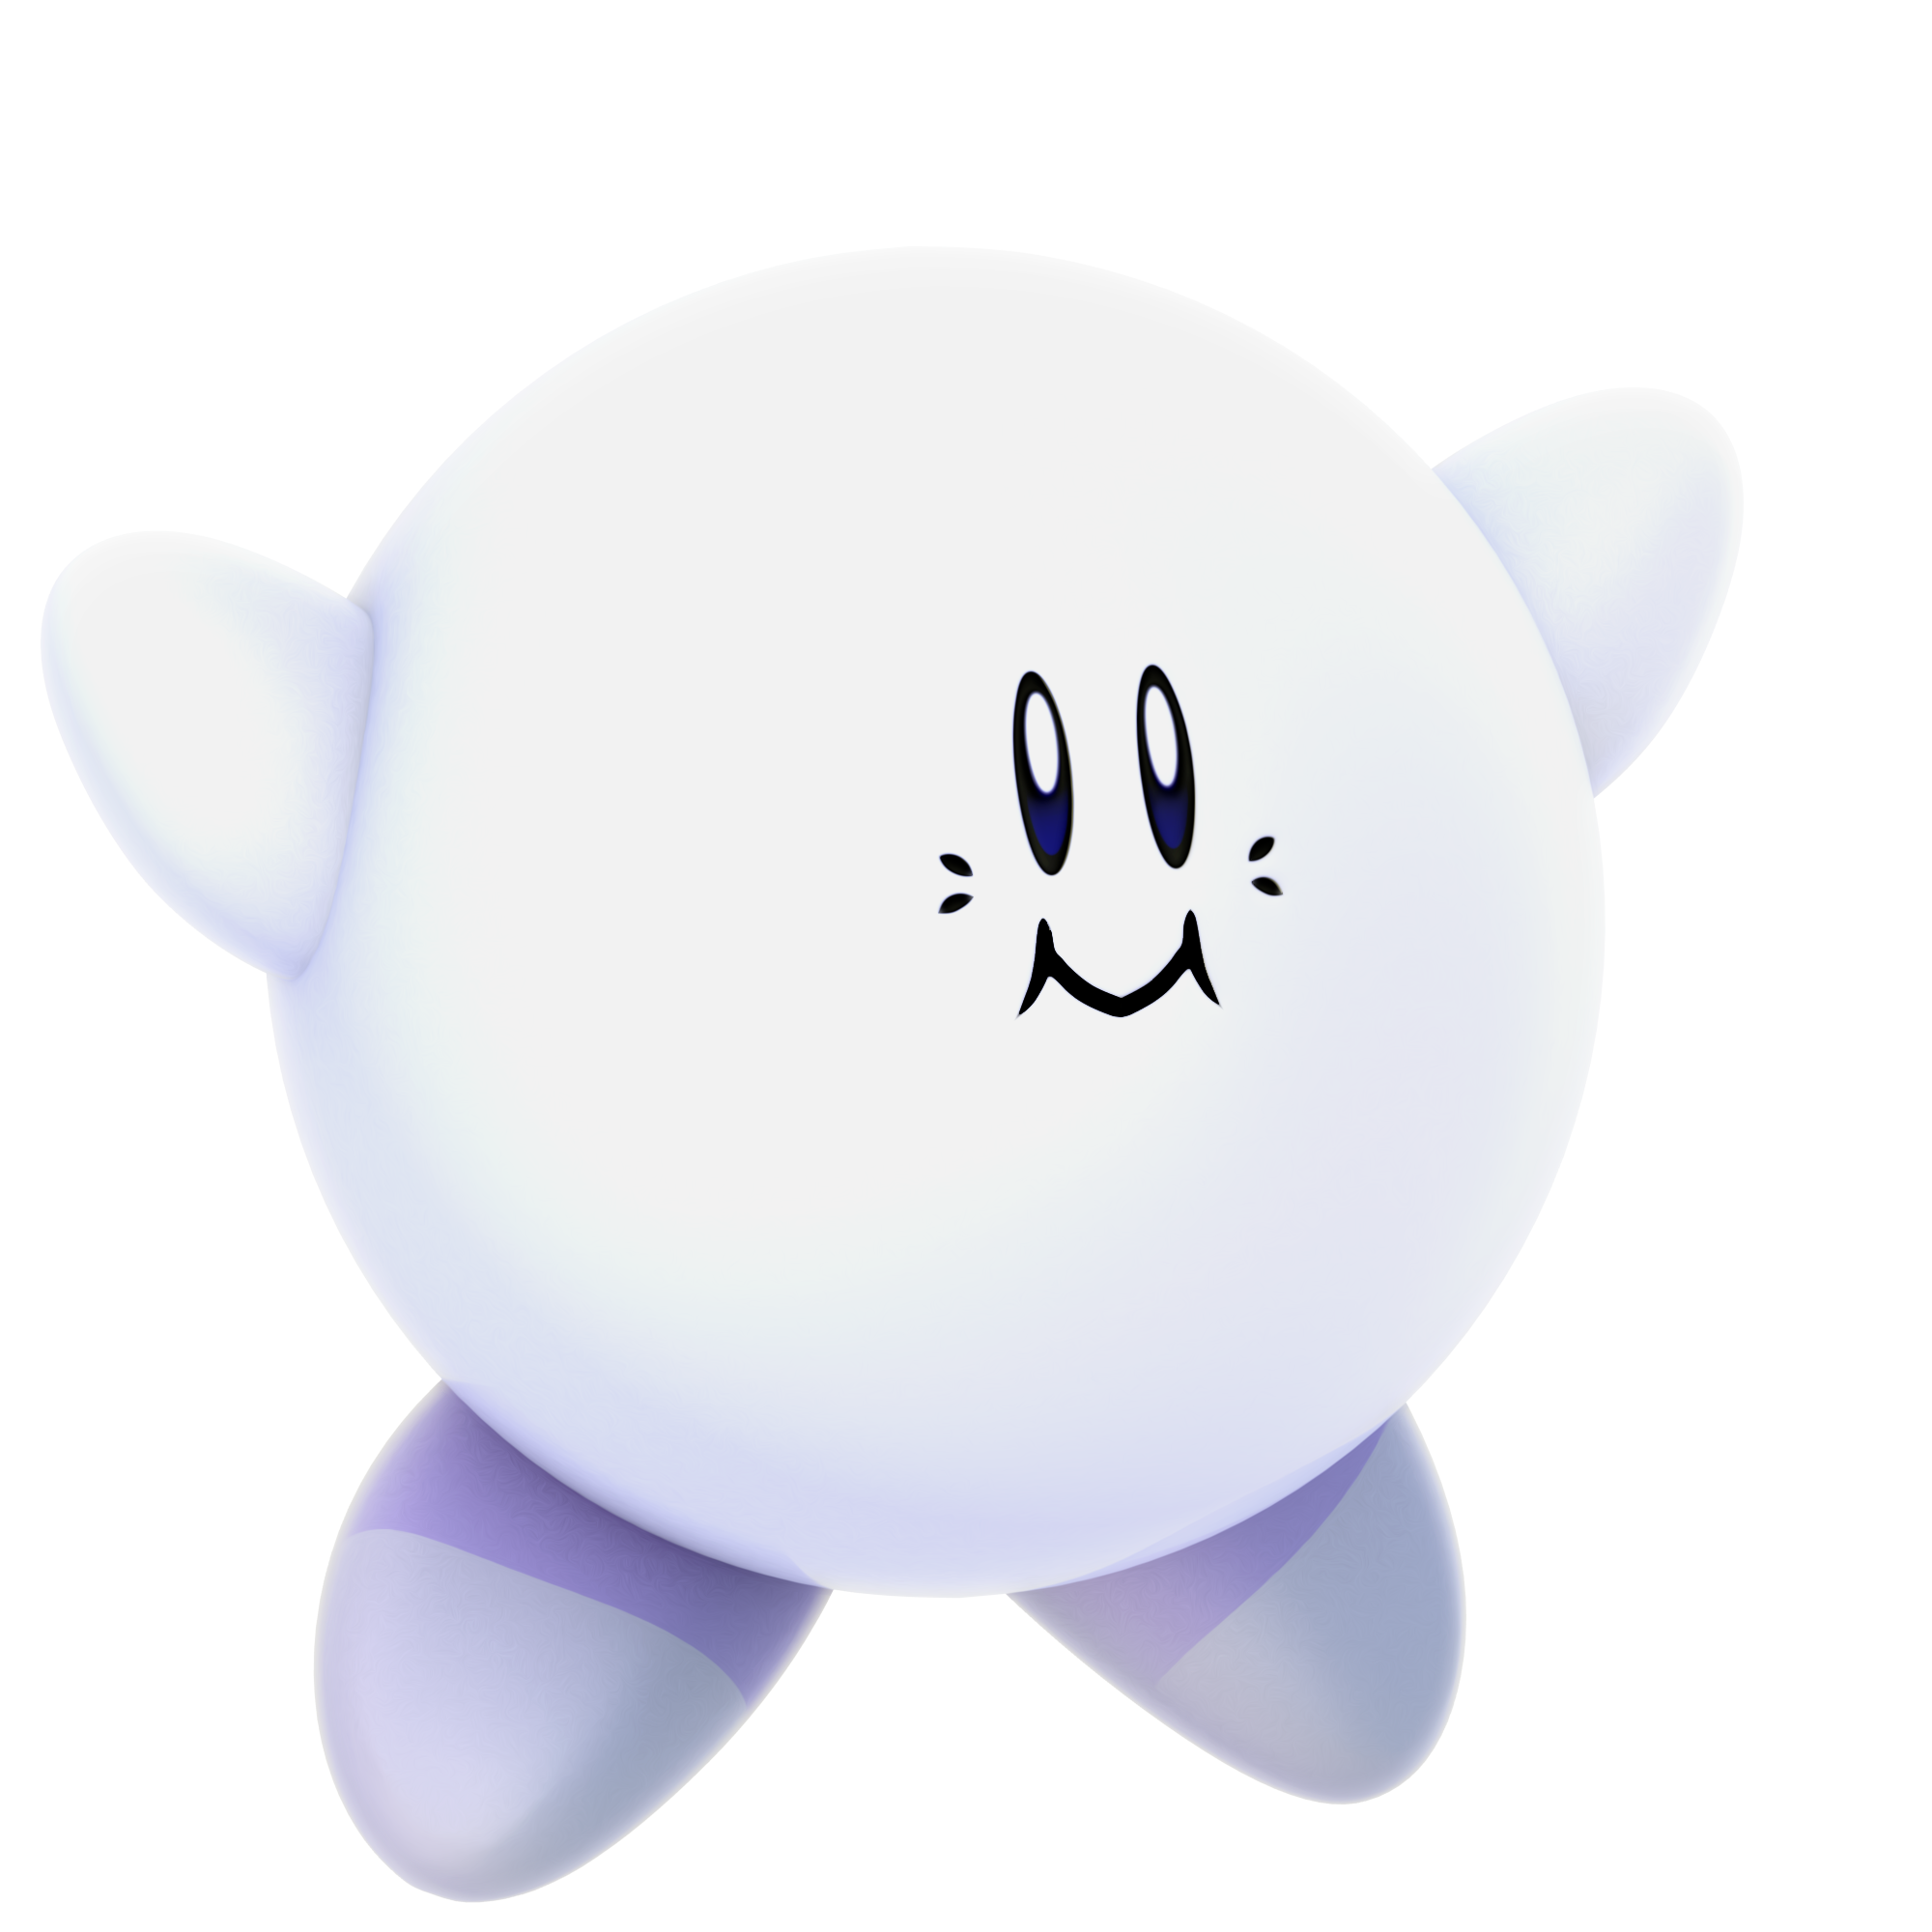 Nibroc.Rock on X: The first of the new Kirby renders is Classic Kirby  based on his original design from Dreamland and Adventure along with a pink  version!  / X